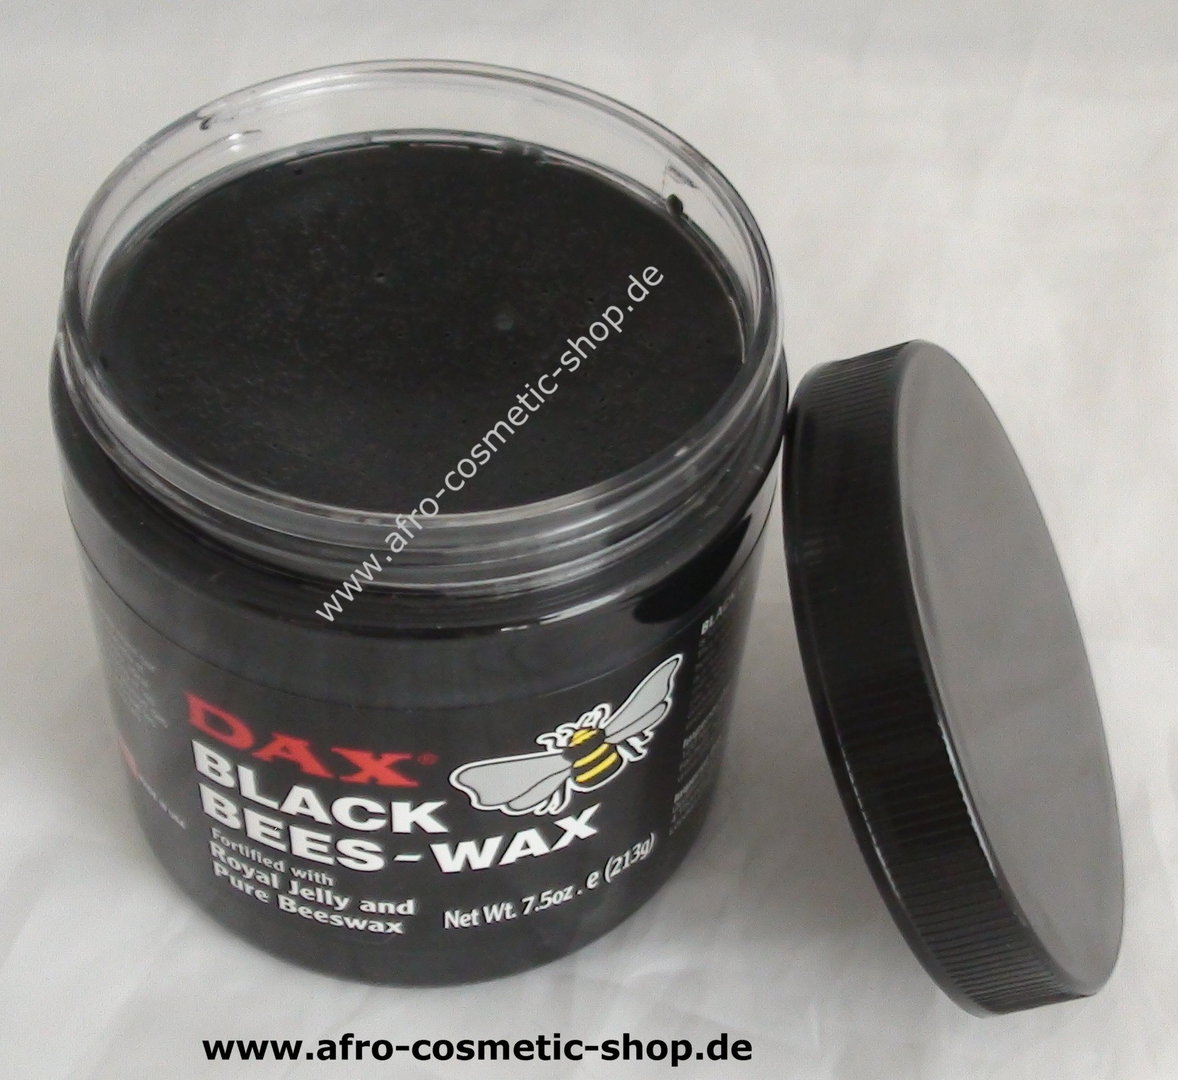 Dax Black Bees-Wax 7,5 oz - Afro Cosmetic Shop